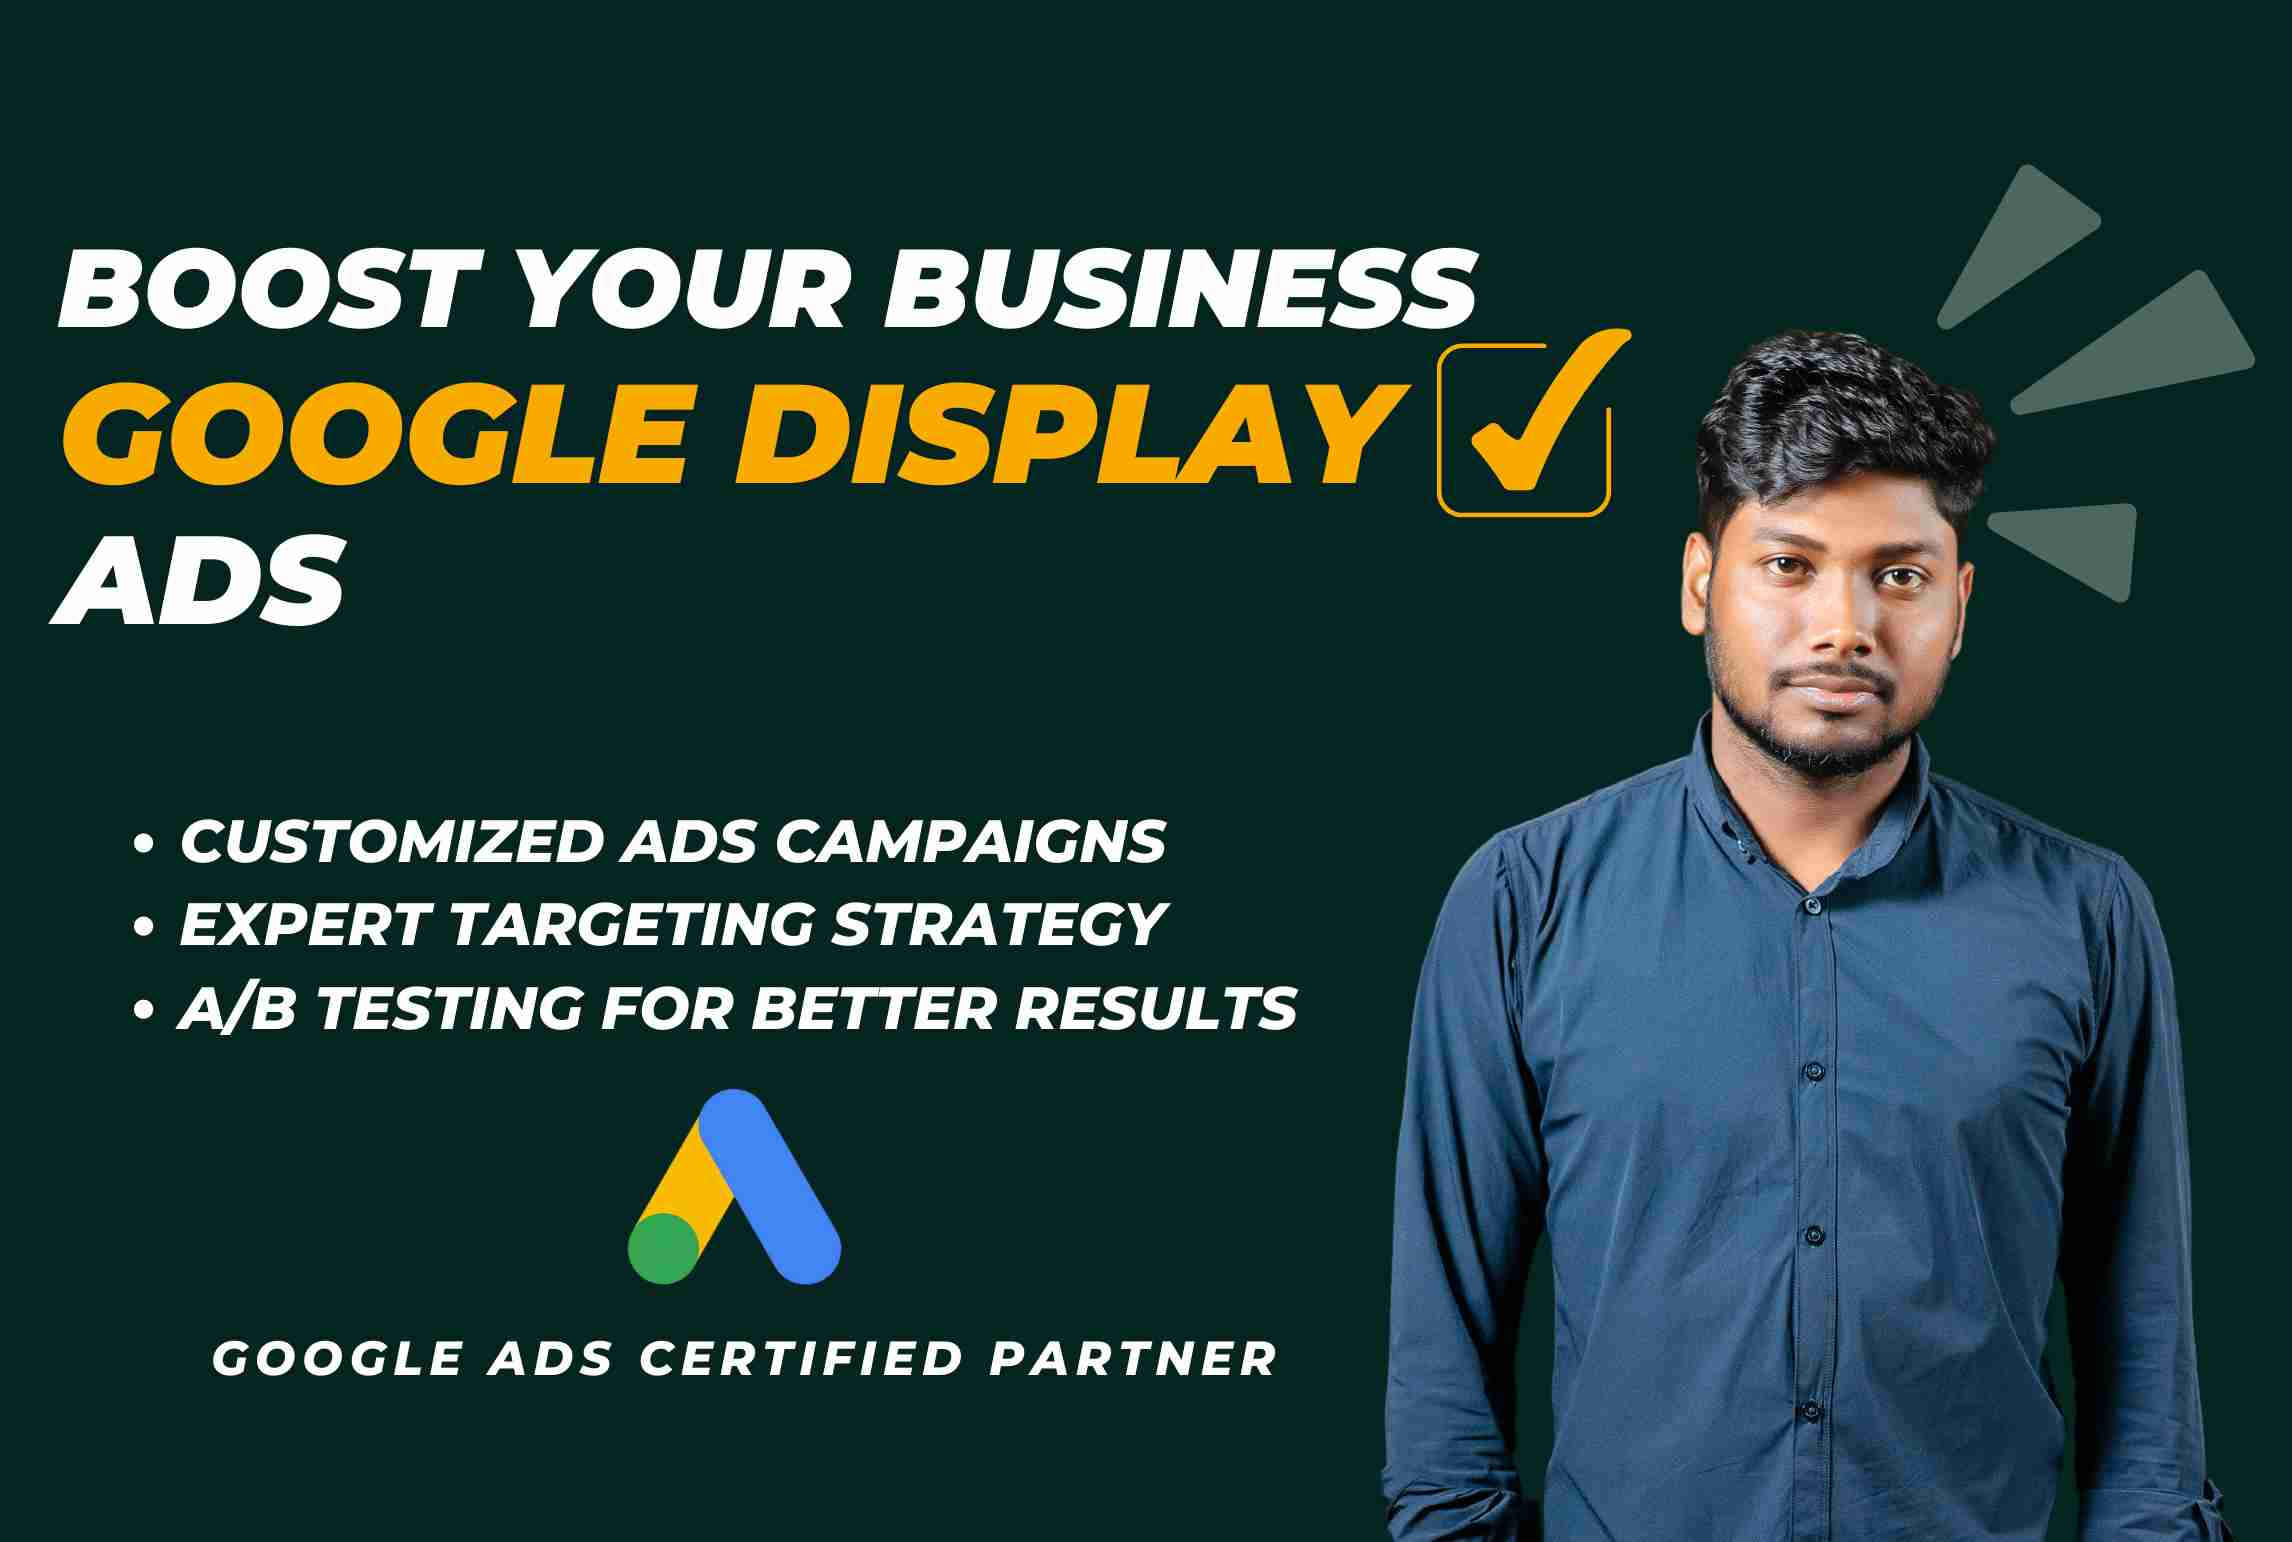 I will boost your business with google display ads campaign and banner ads